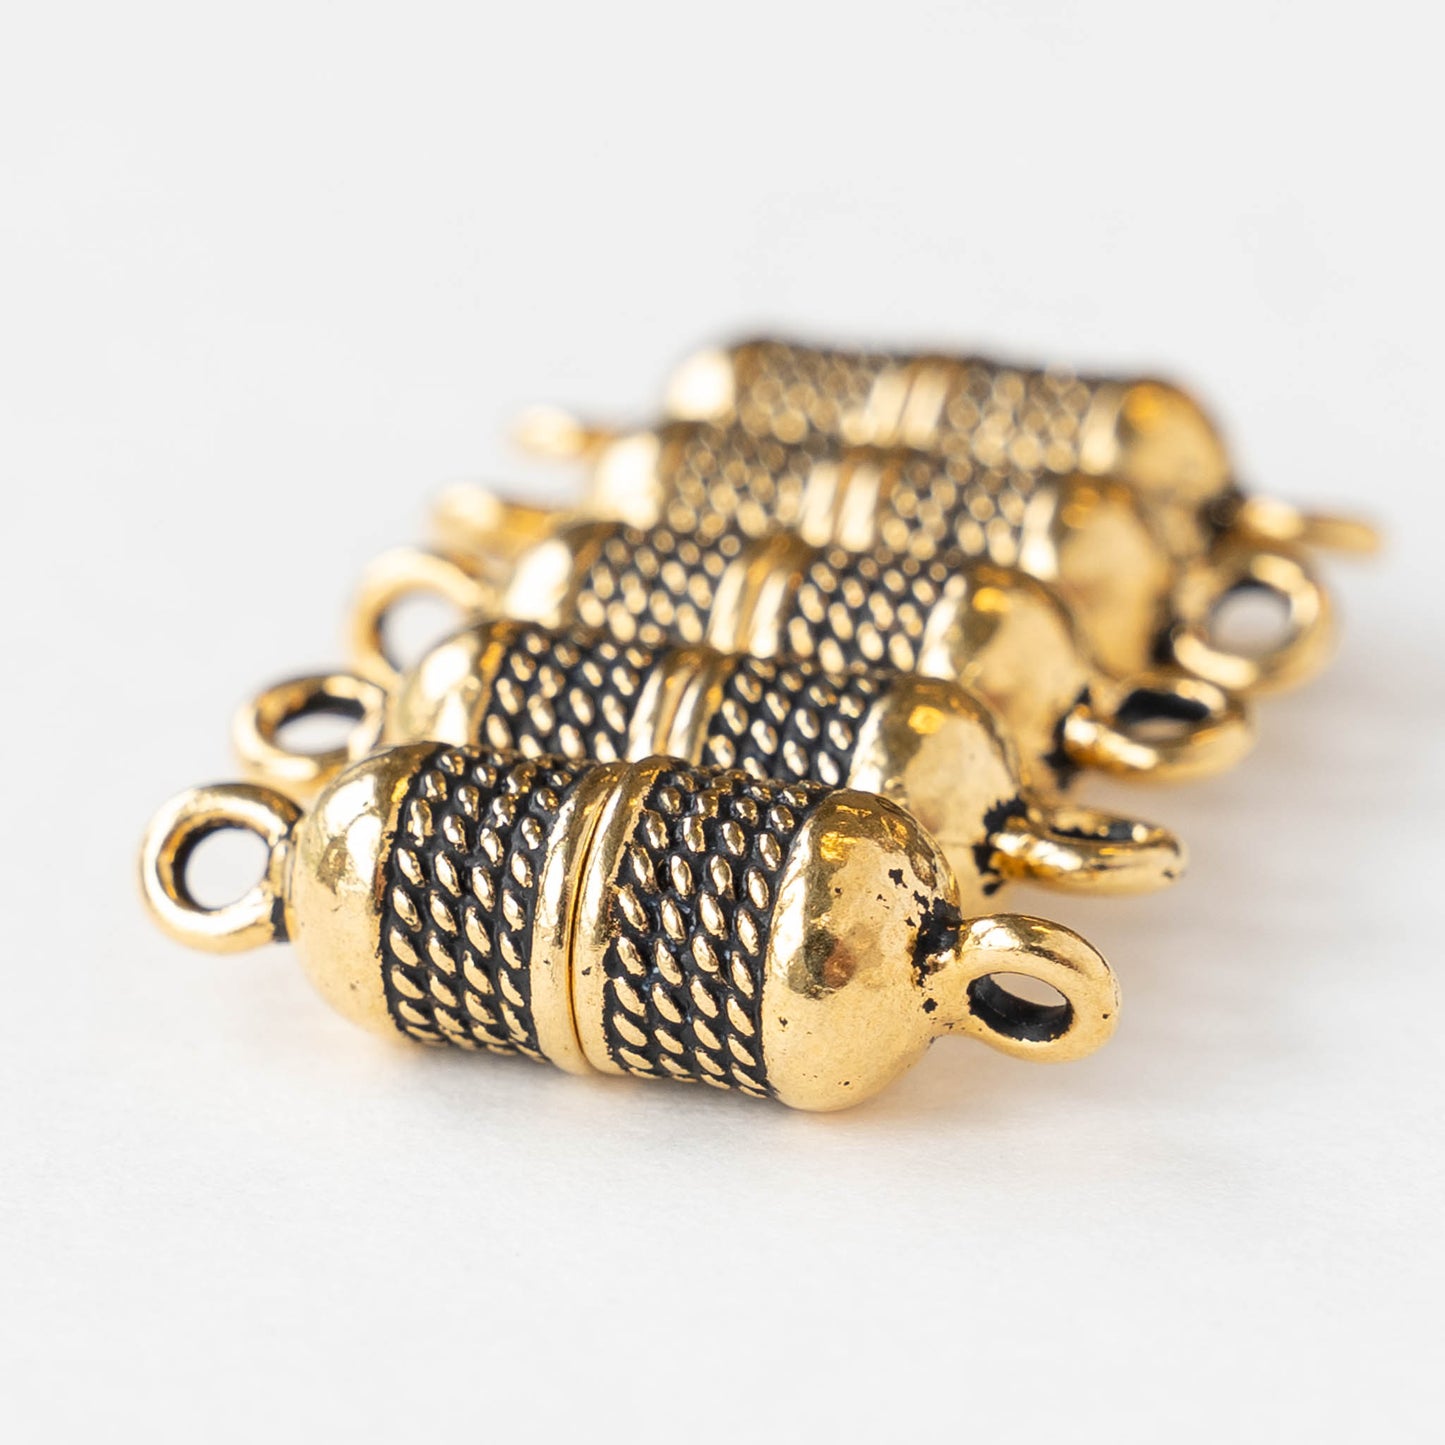 Magnetic Clasp - Antiqued Gold  - 1 clasp